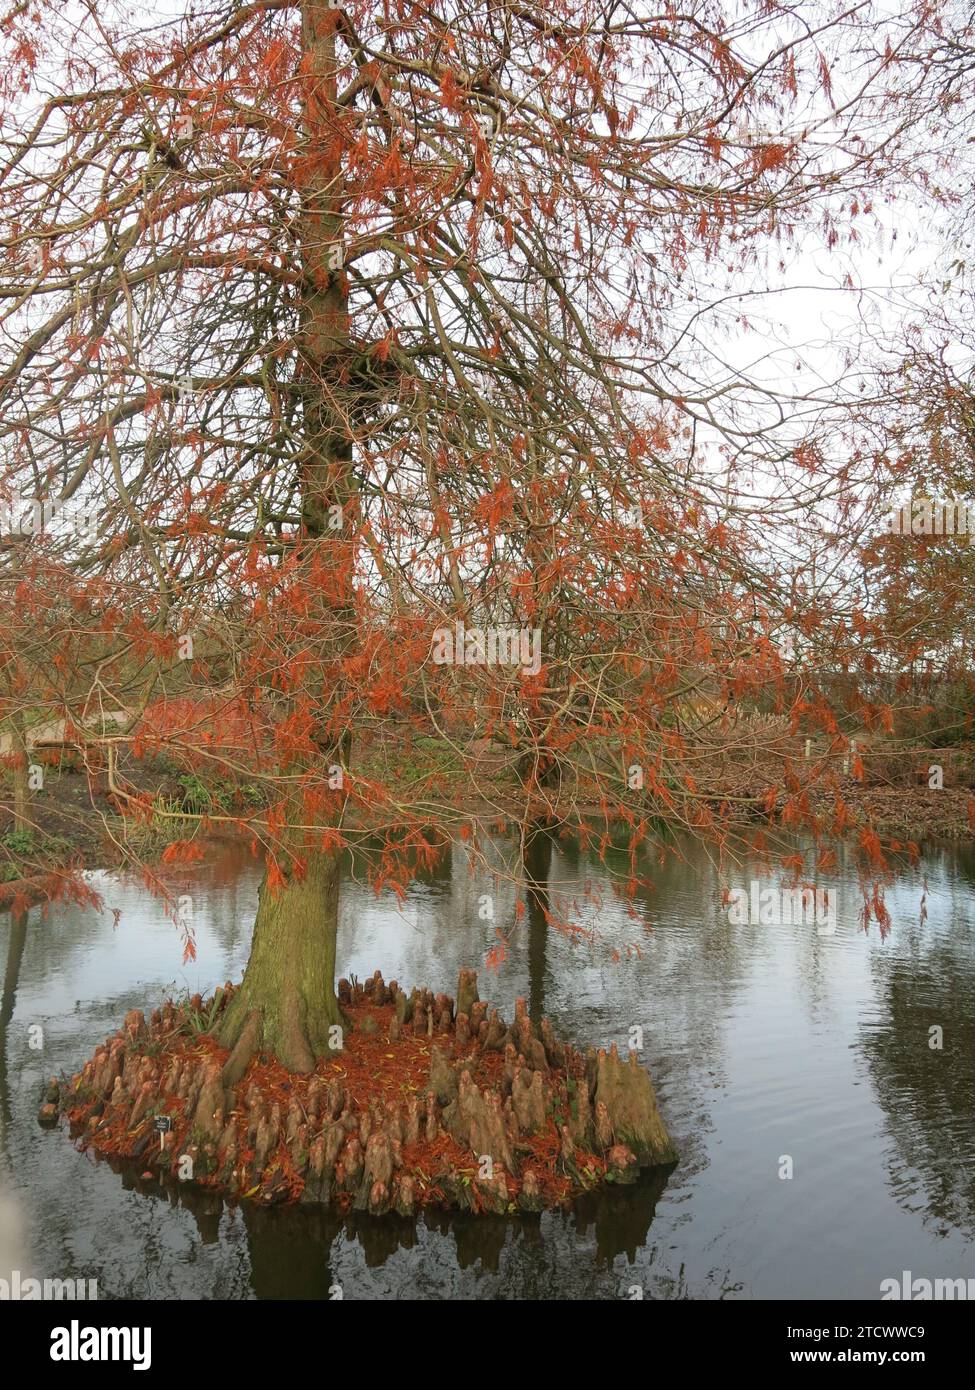 A winter scene with the red foliage and knobbly knees of the conifer tree, the swamp cypress taxodium distichum, growing on an island bed in a lake. Stock Photo